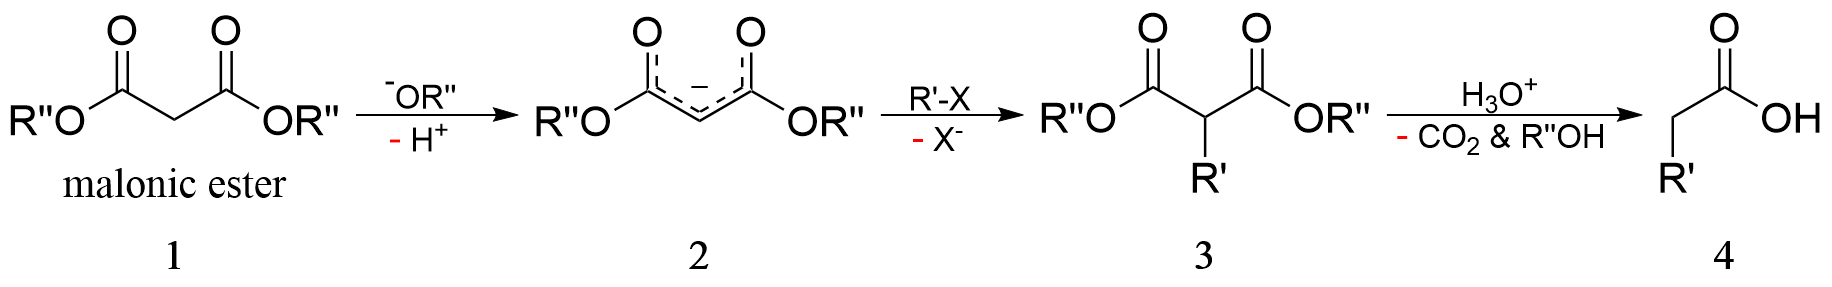 Malonic_ester_synthesis.png